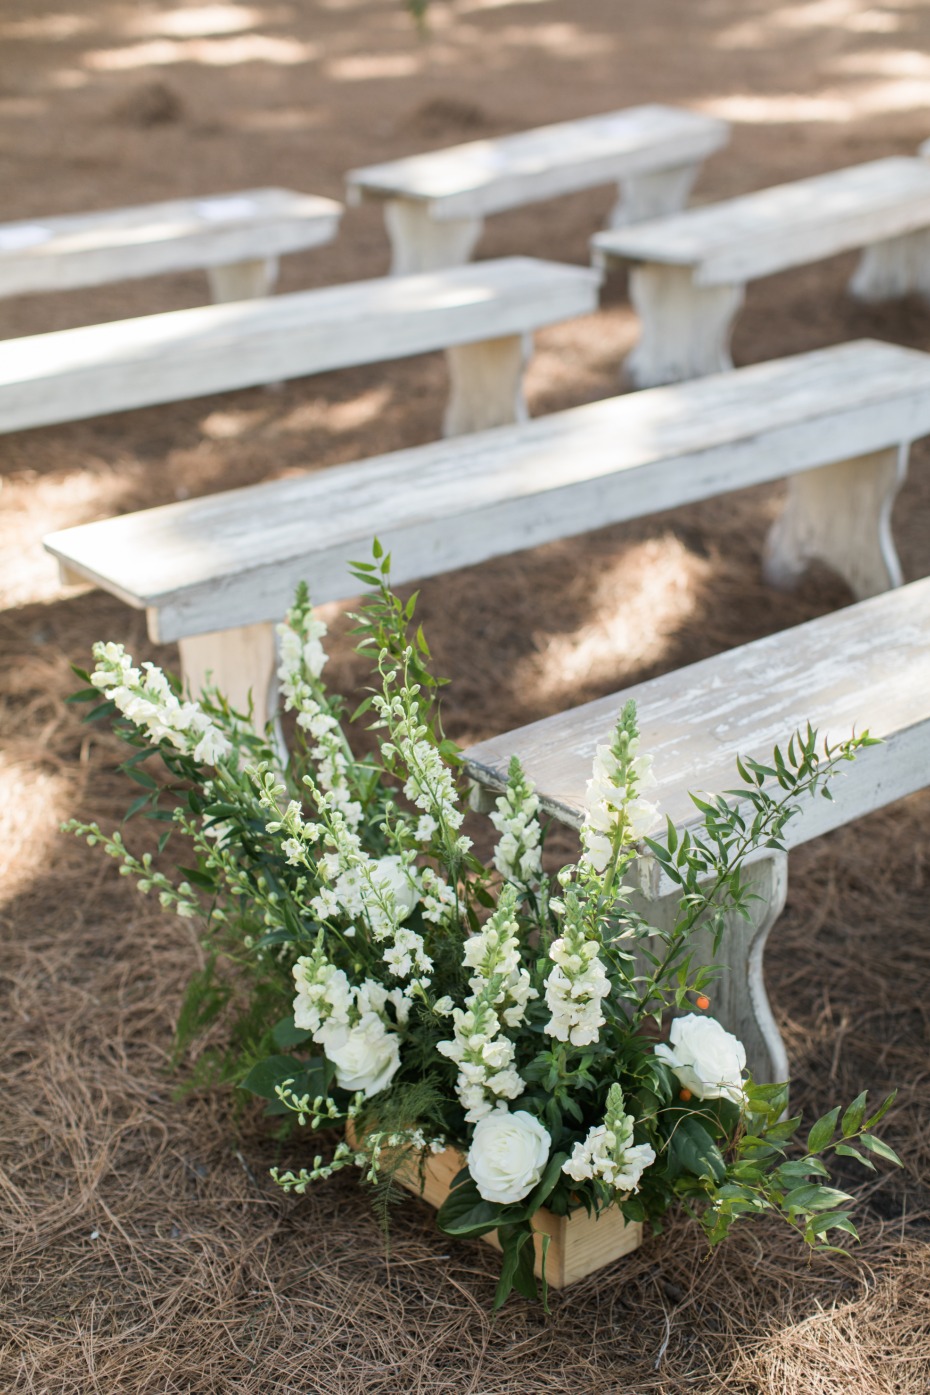 Boxes of florals for the aisle